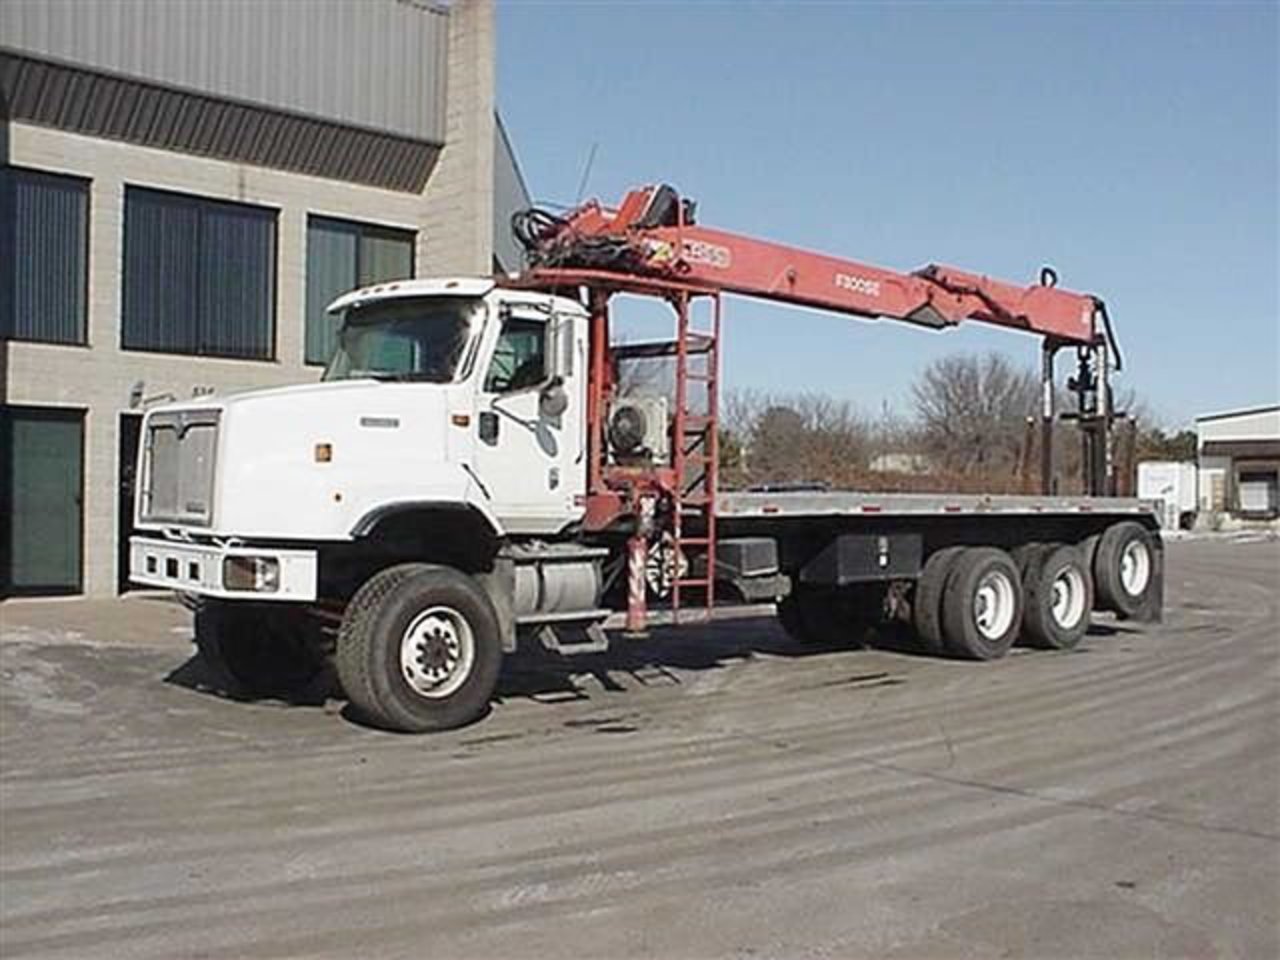 2003 International 5600i Boom Truck Photo, Detailed about 2003 ...